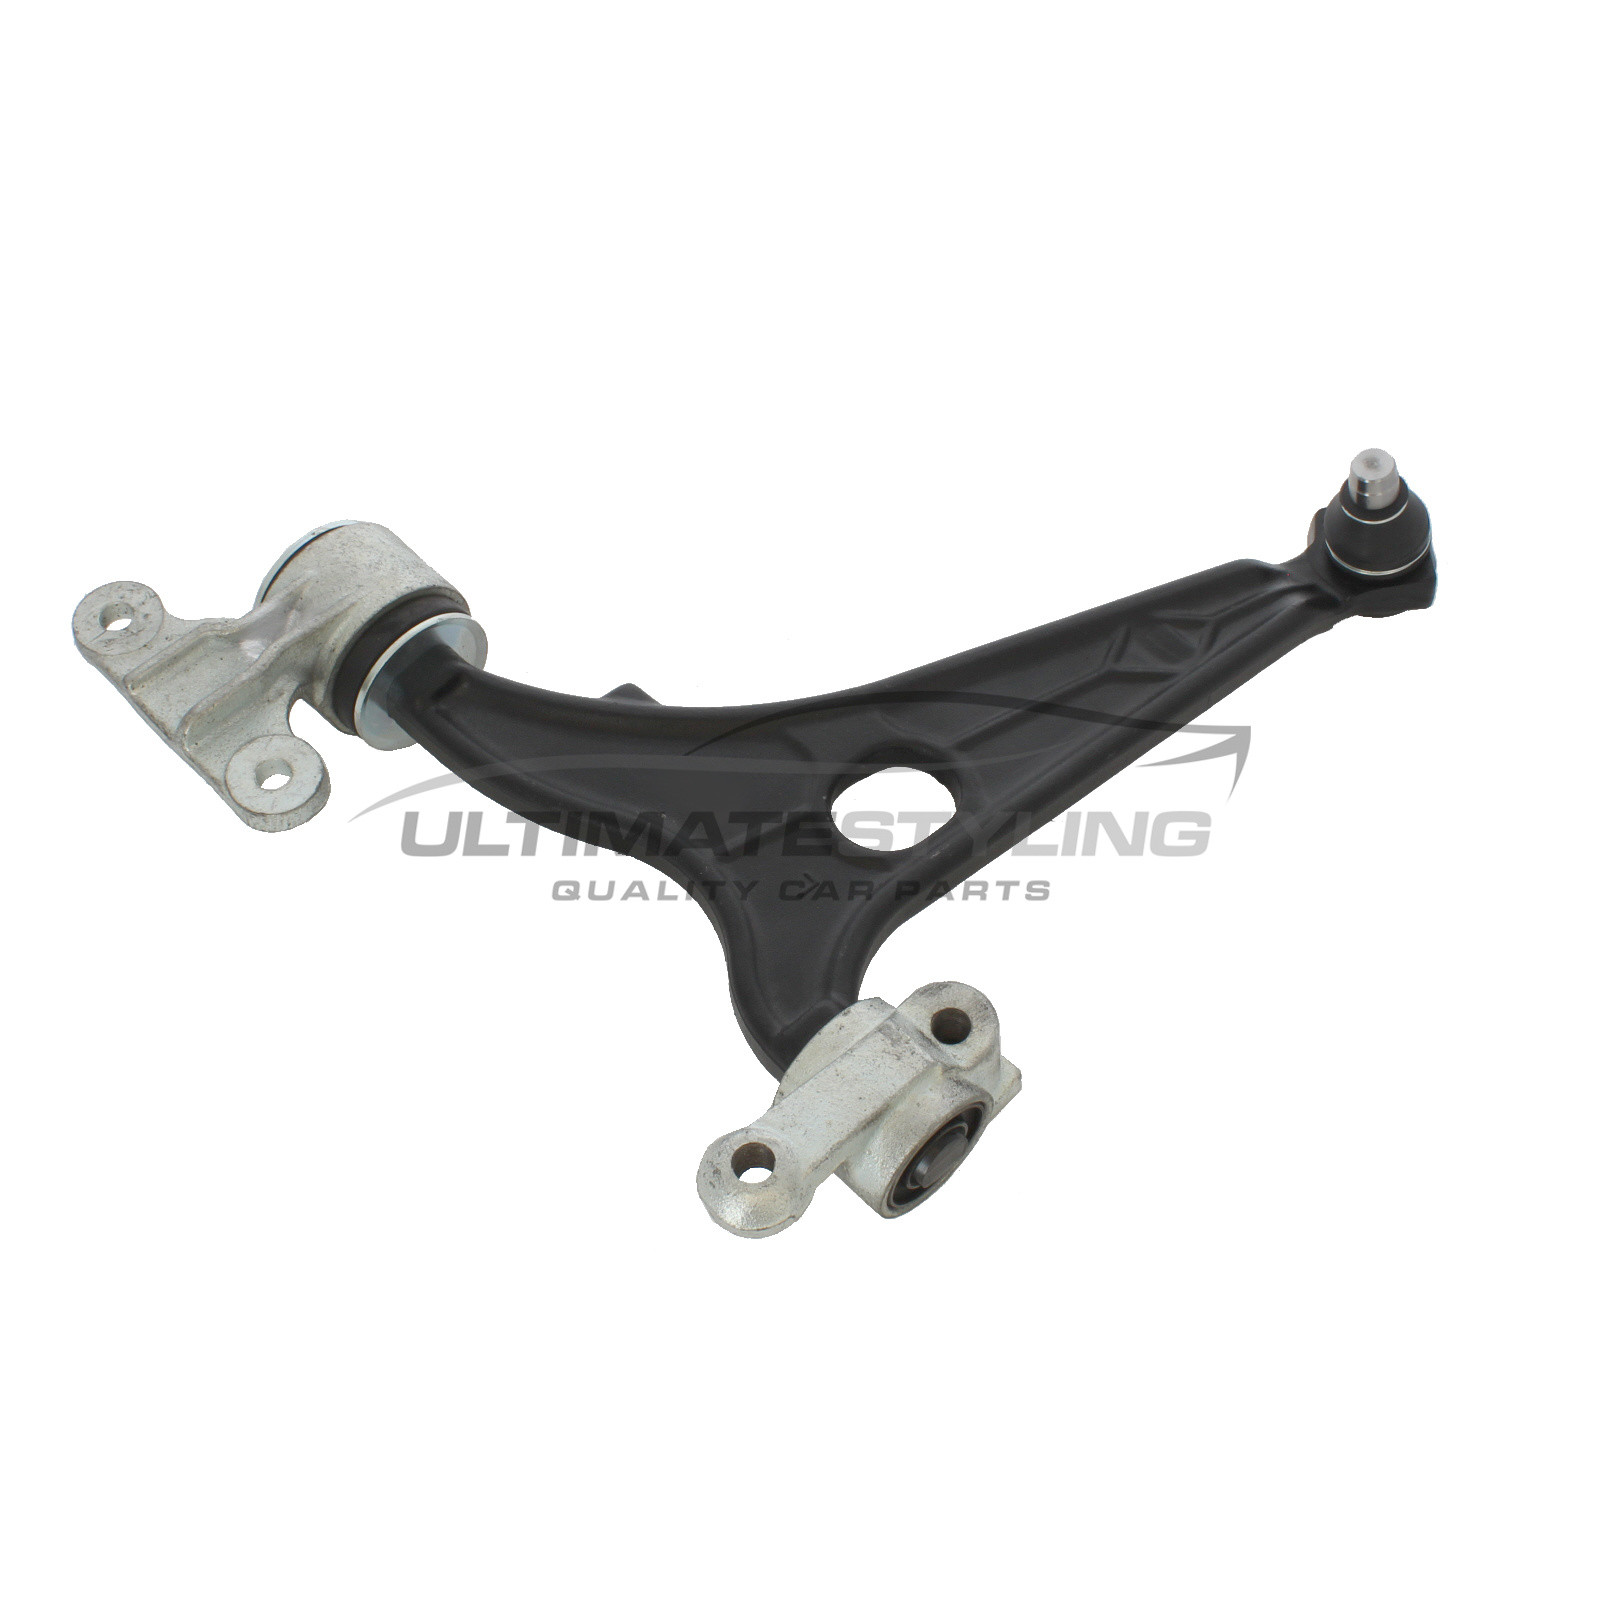 Citroen Dispatch 2007-2017, Fiat Scudo 2007-2017, Peugeot Expert 2007-2017, Toyota Proace 2013-2017 Front Lower Suspension Arm (Steel) Including Ball Joint and Rear Bush Passenger Side (LH)